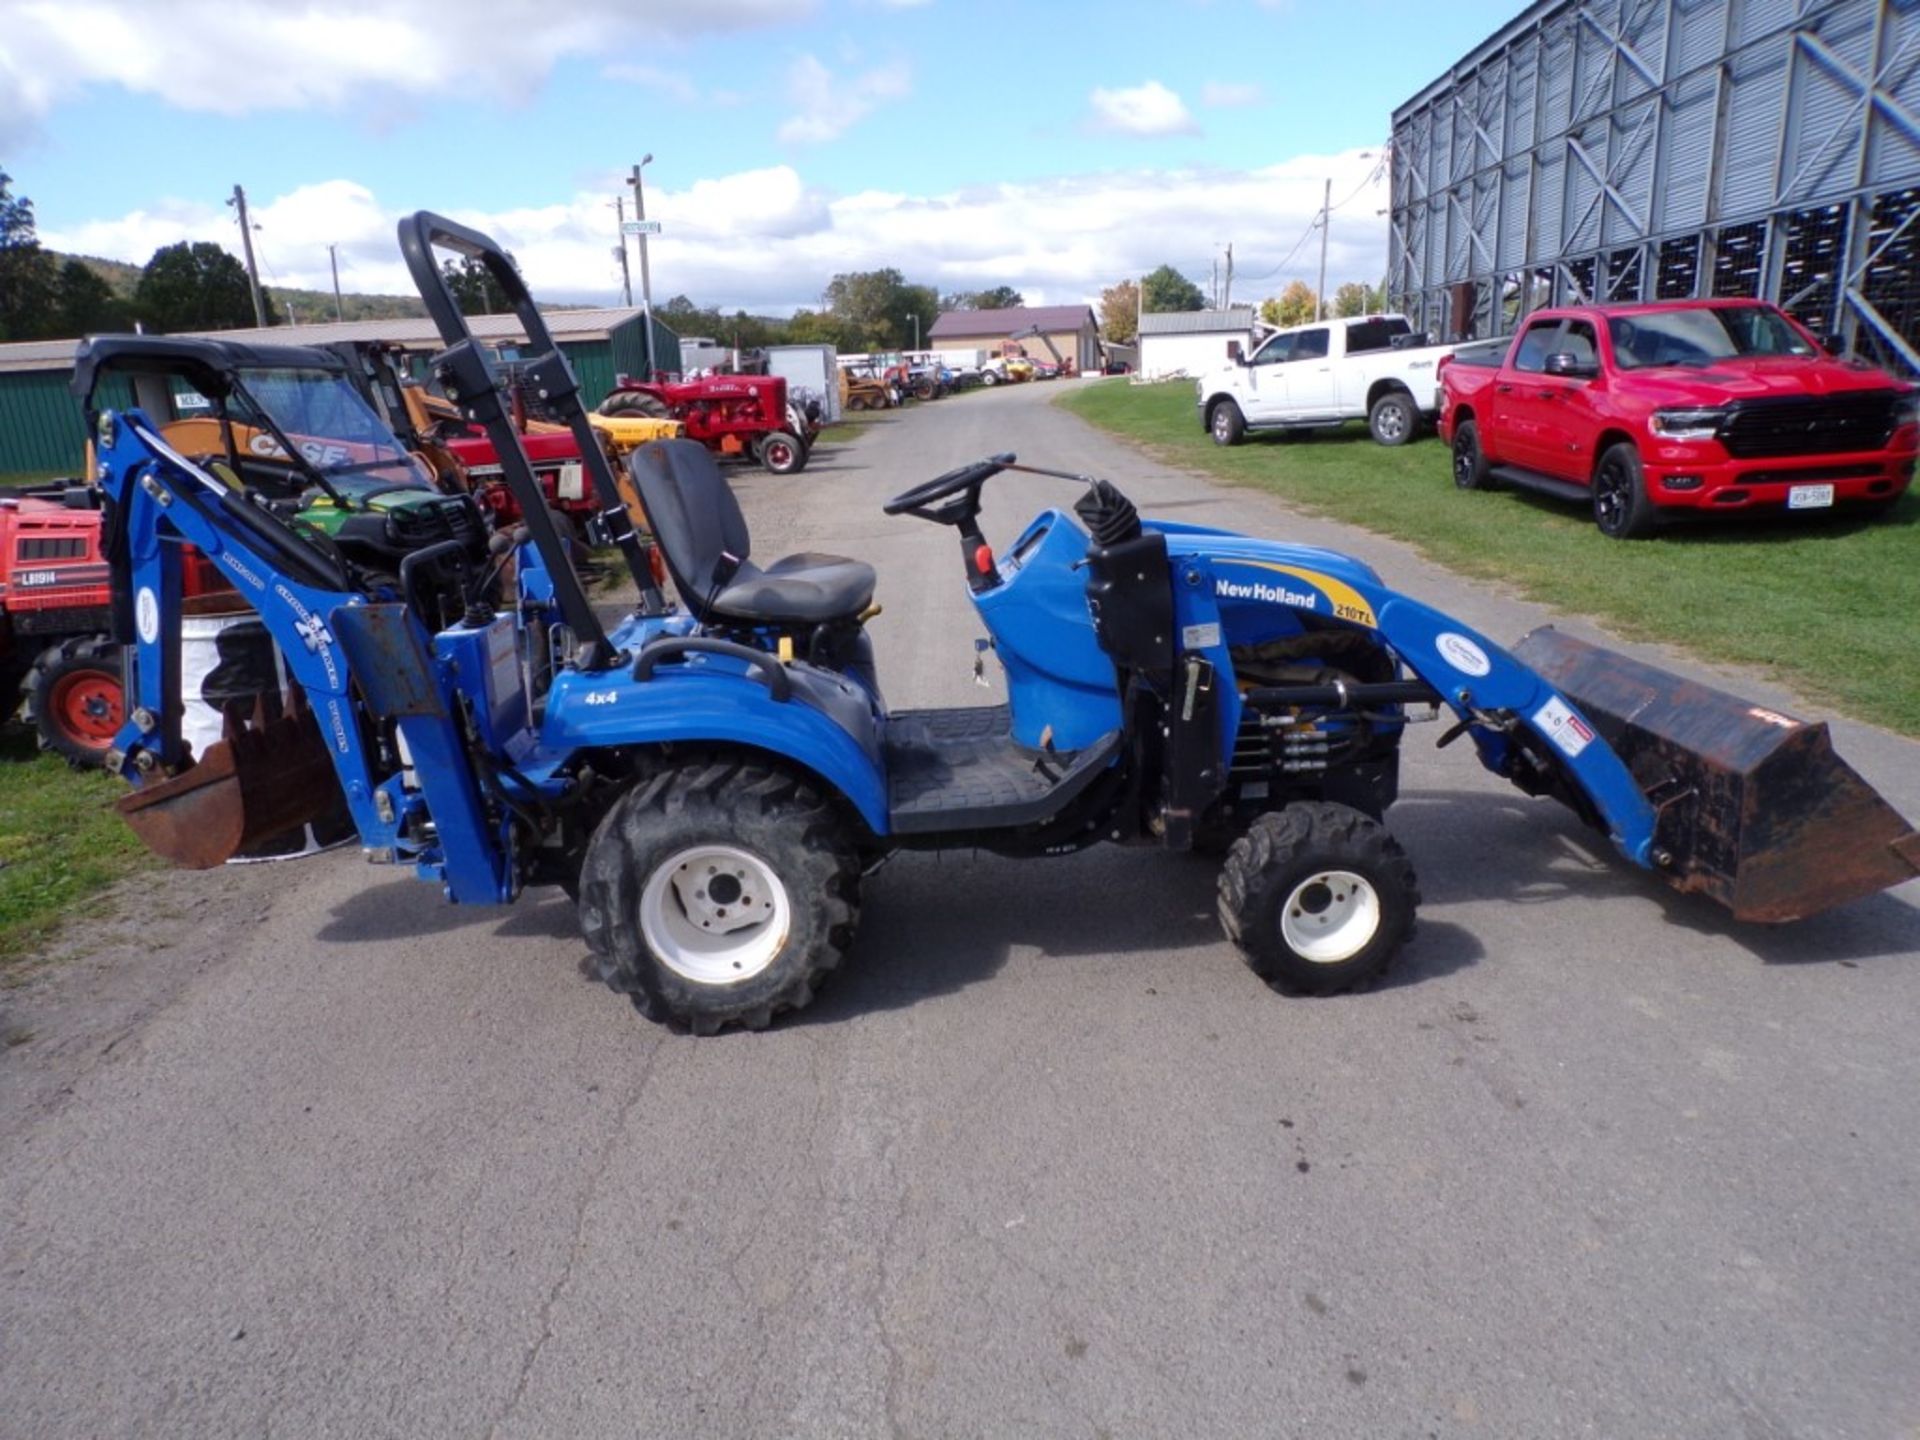 New Holland Boomer 1025 Tractor, 4 WD, Shibaura Dsl. Engine, N.H. 210TL Loader ARms And 48'' Bucket,